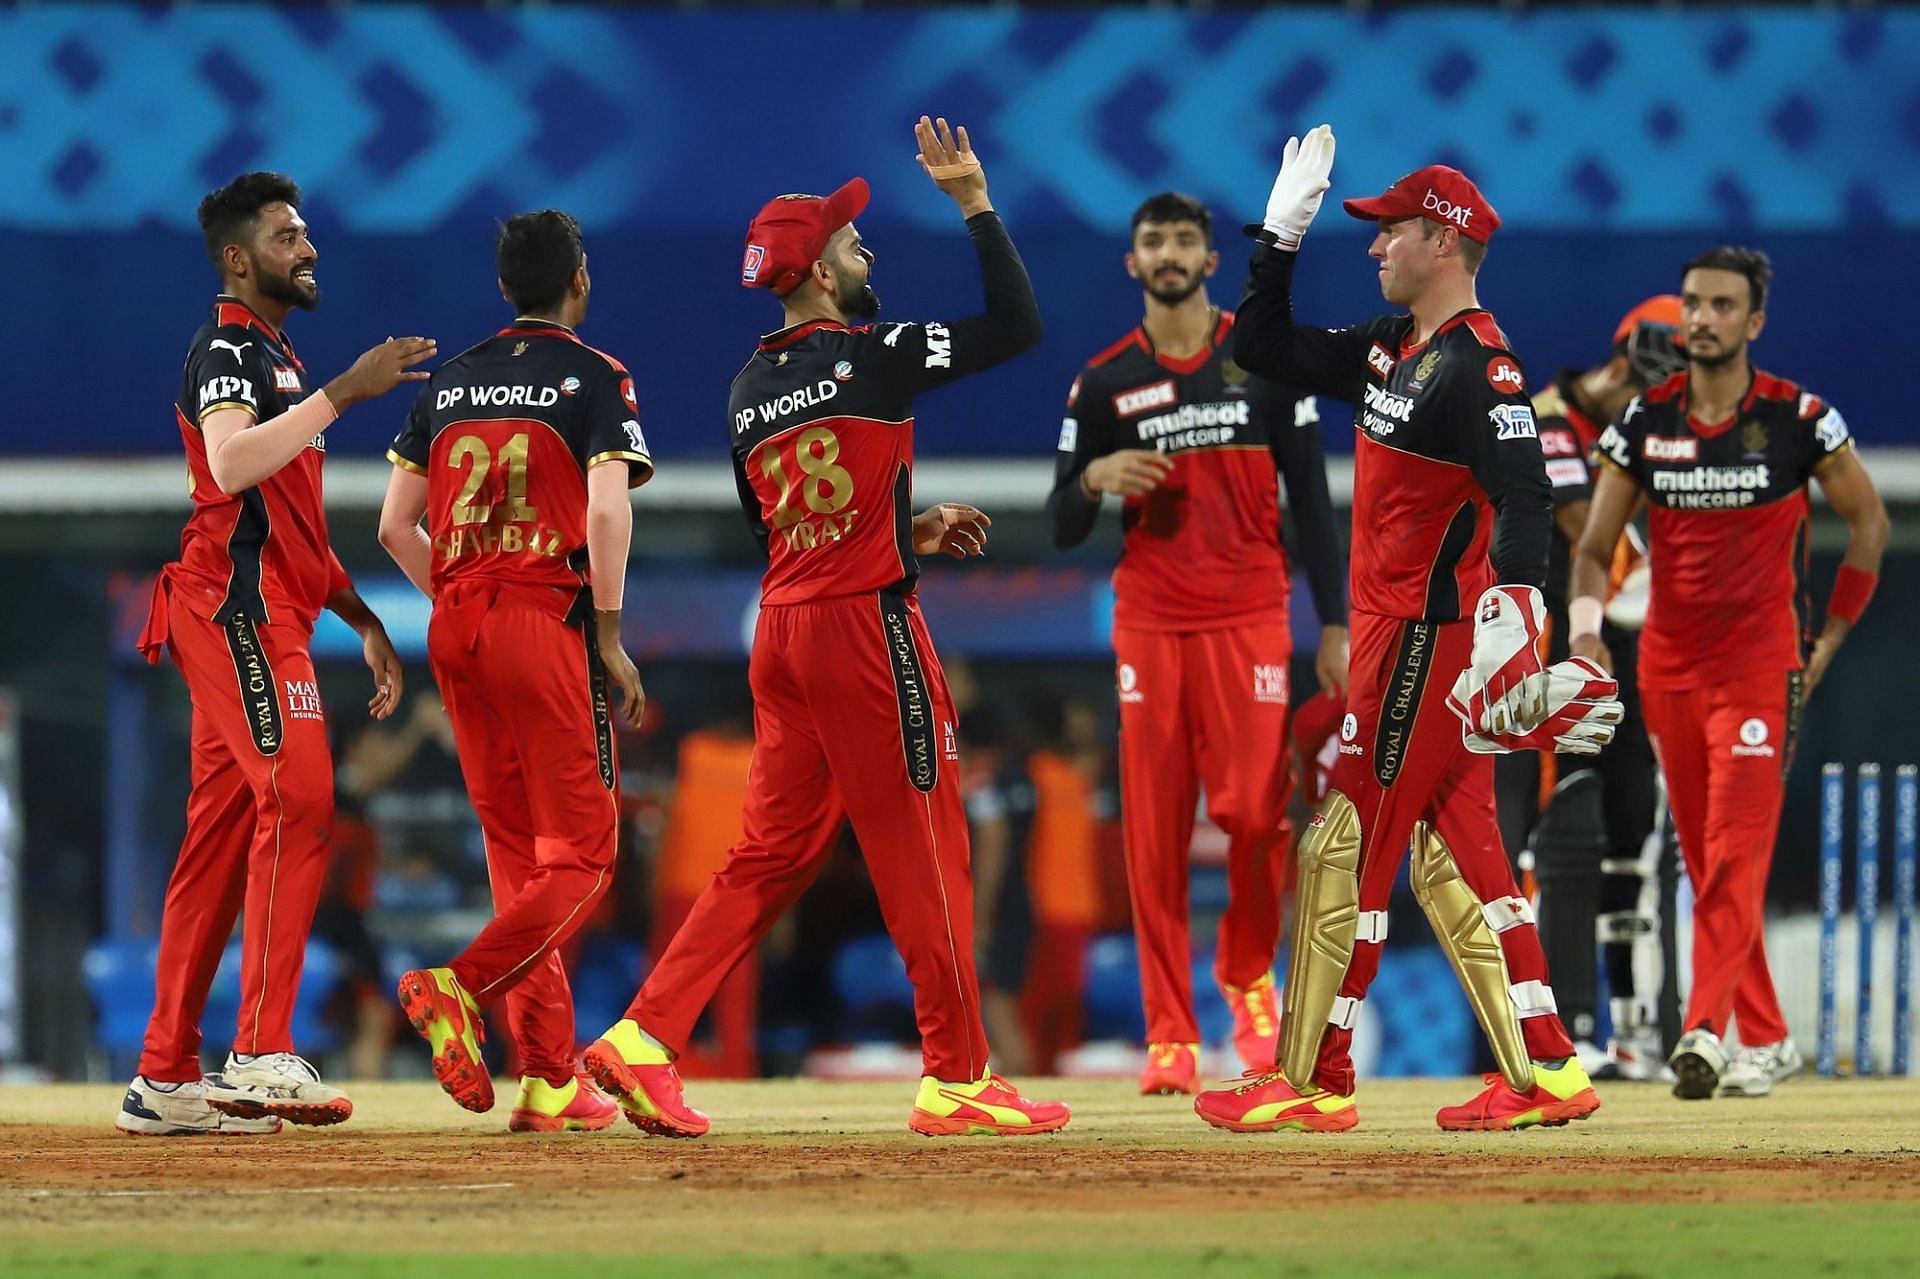 RCB will be hoping to end the wait for their maiden IPL title. (Credits: BCCI)